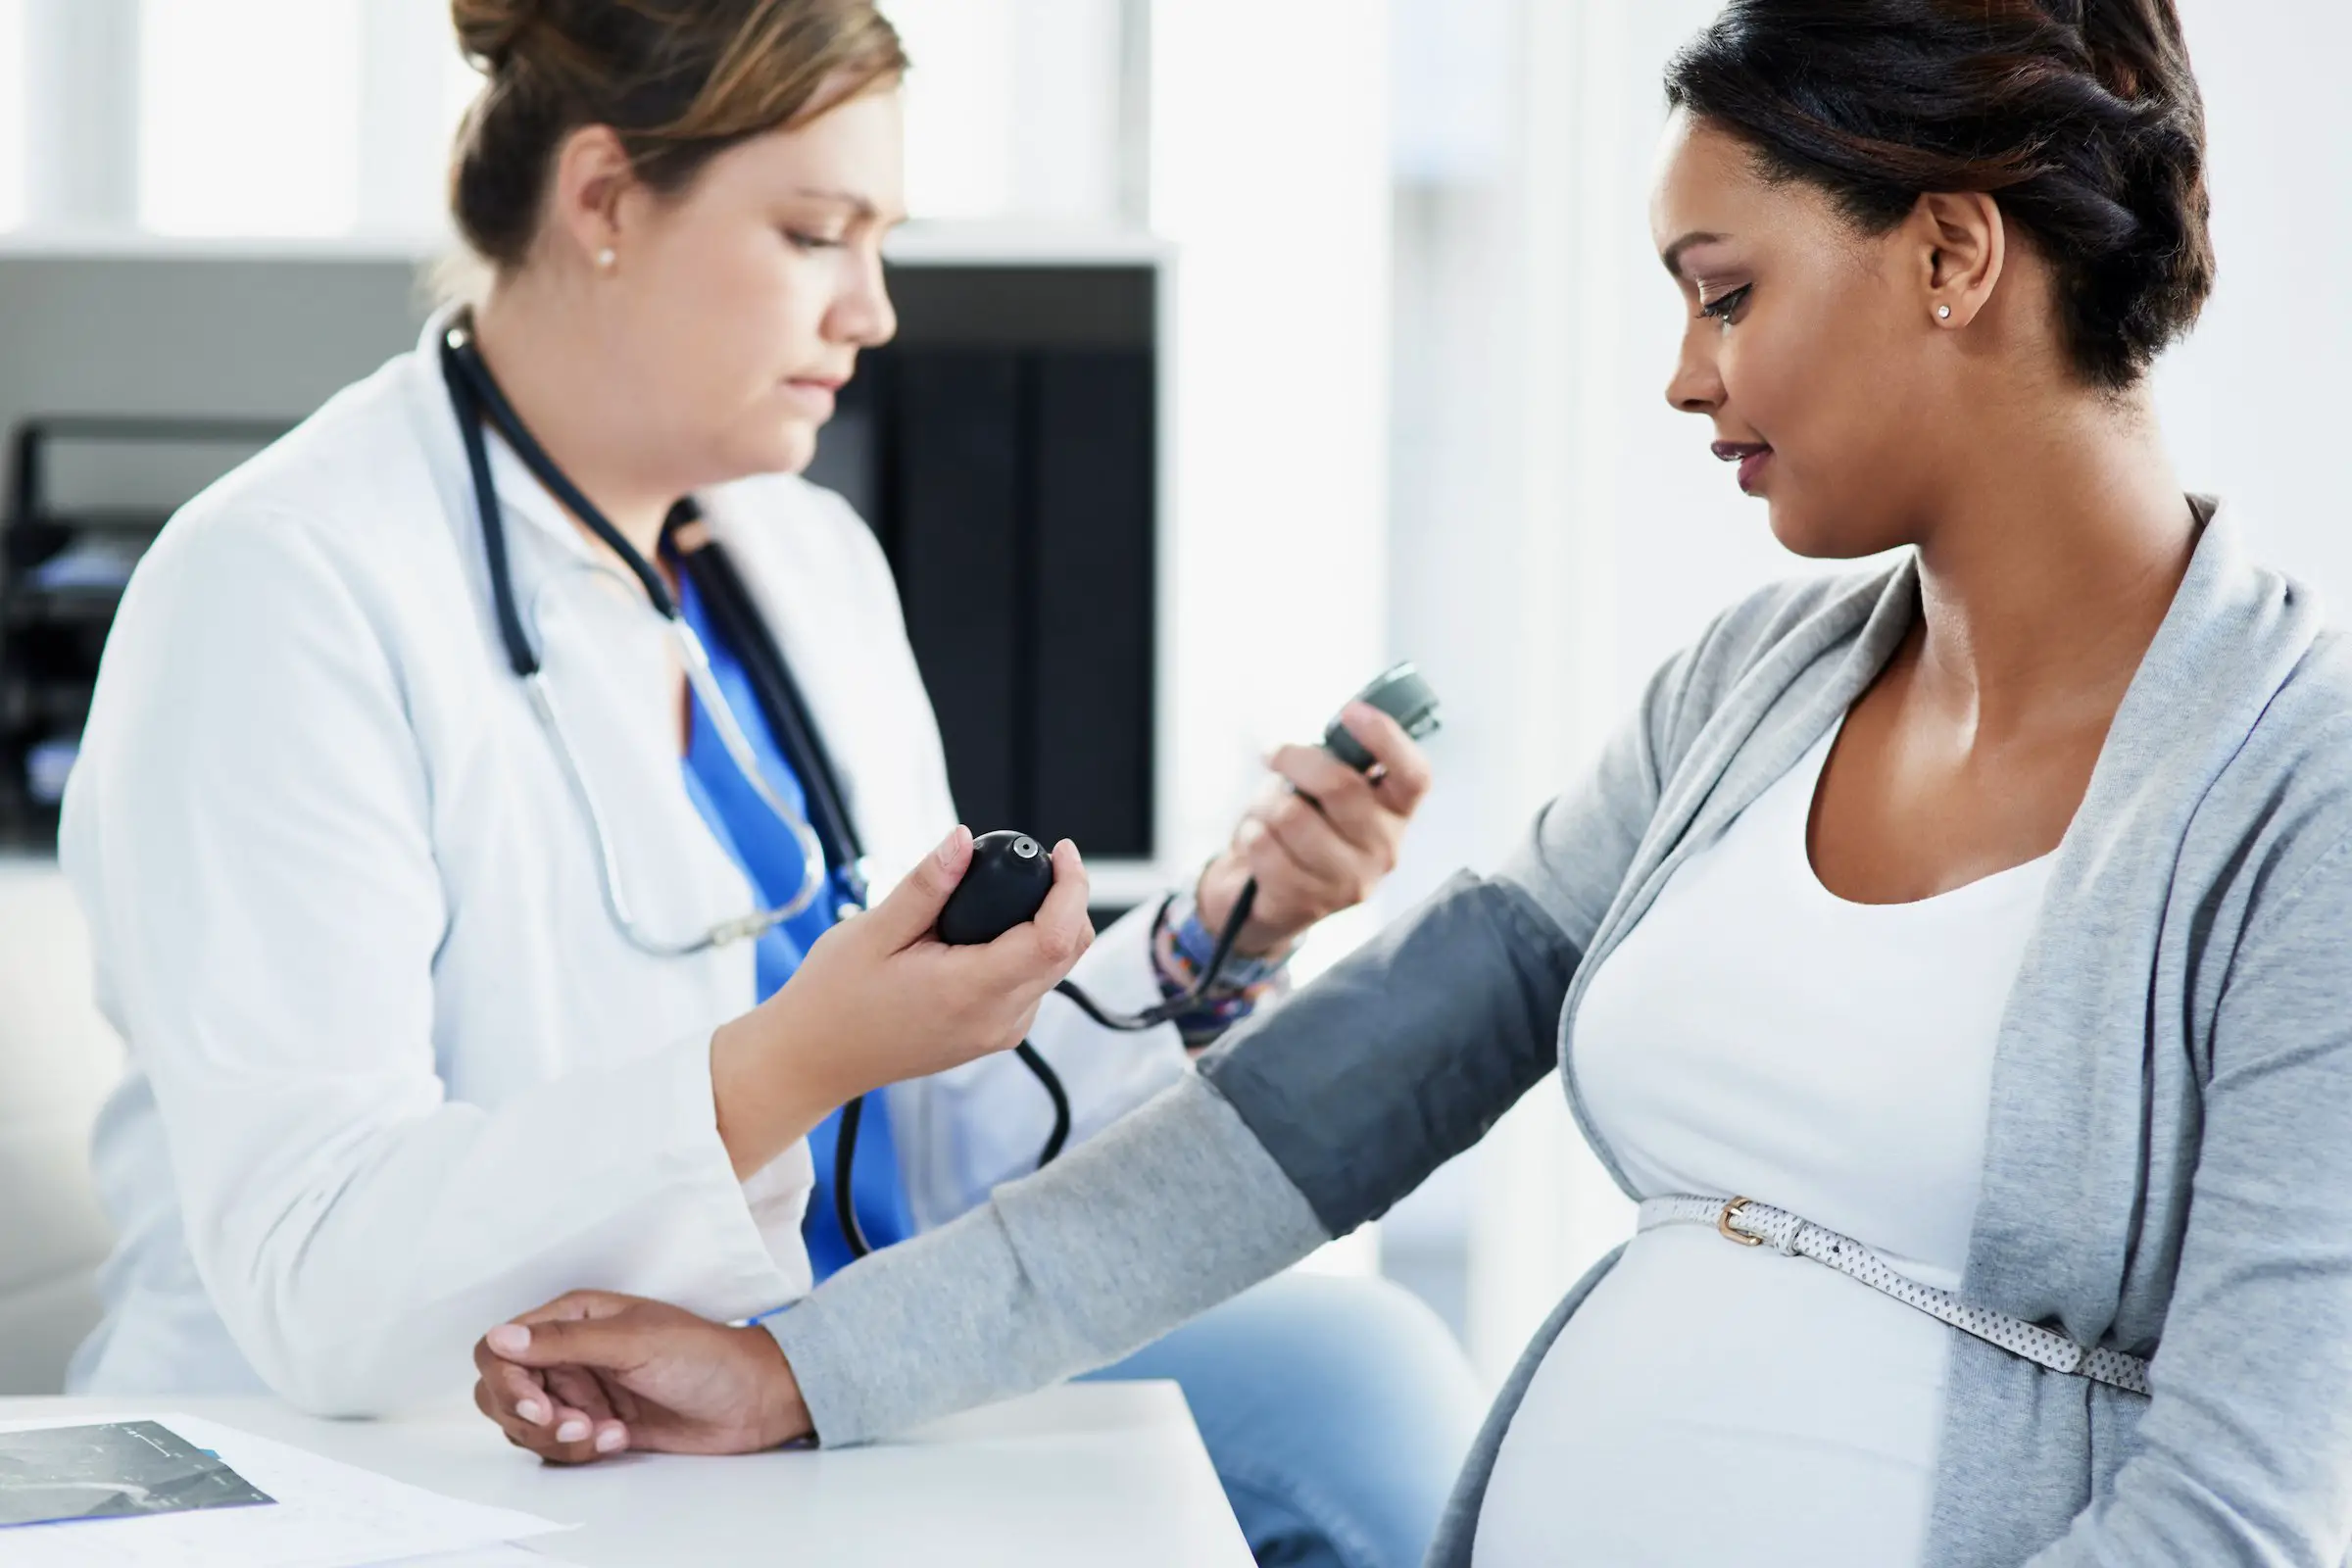 High Blood Pressure During Pregnancy May Affect Menopause ...